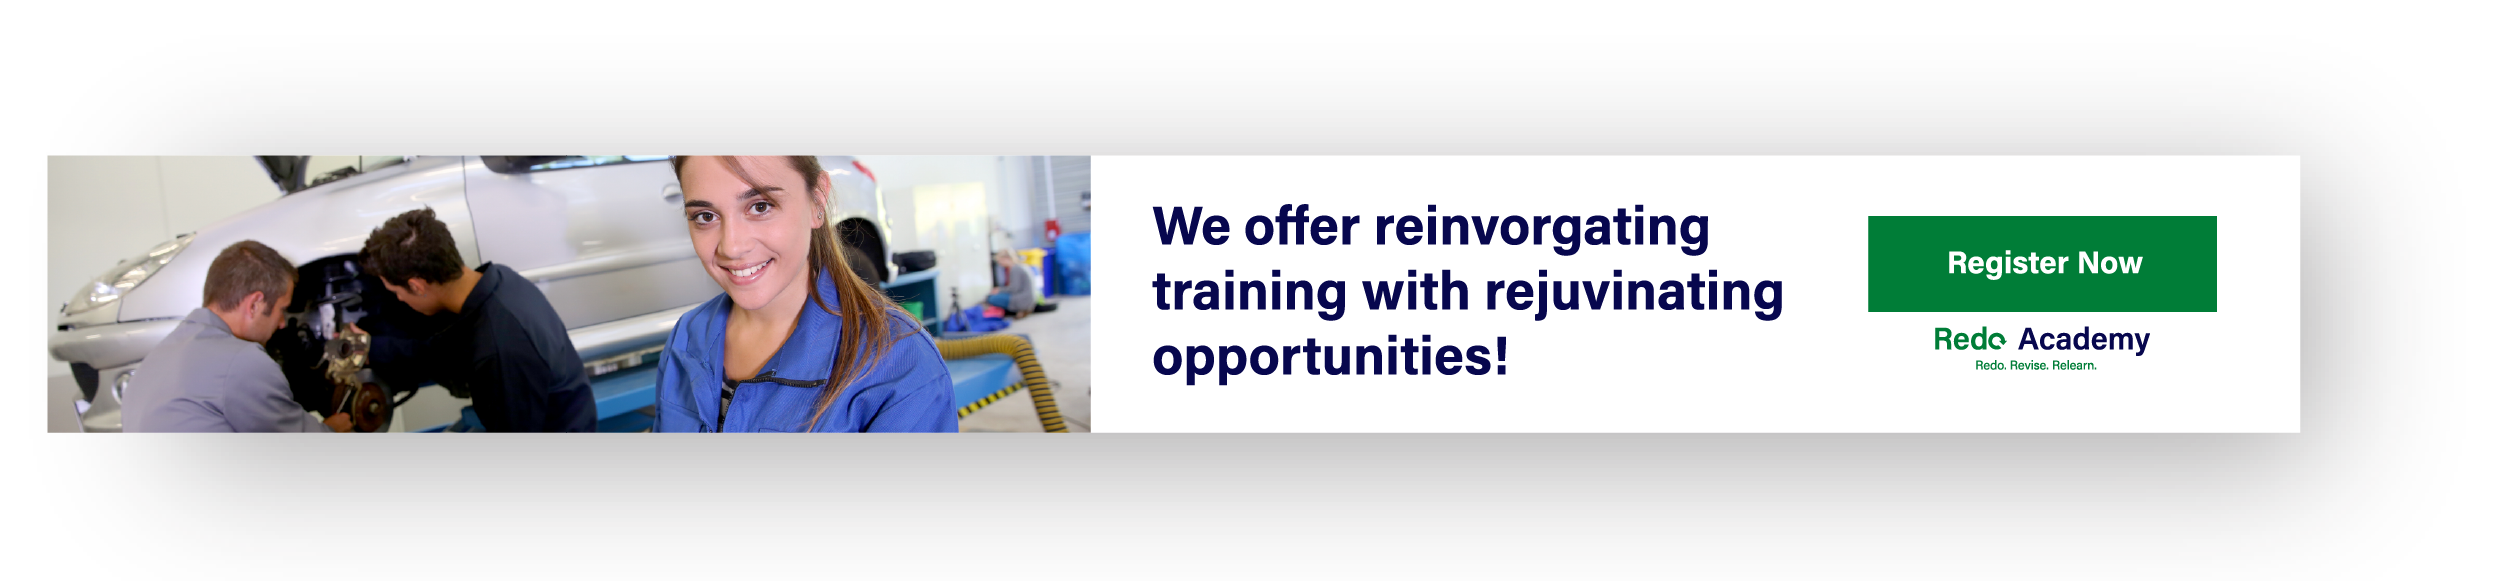 This is an image 
		advertising Redo Academy. It's styled like a horizontal banner advertisement.
		Almost the entire left half of the banner consists of an image depicting two
		men working on a car while a woman smiles at the camera. The right side of the 
		advertisement says, We offer incorgating training with rejuvinating opportunities!
		in a dark blue color. To the right of this large block of text is a green, rectangular 
		button that says Register Now, and the Redo Academy logo below it.